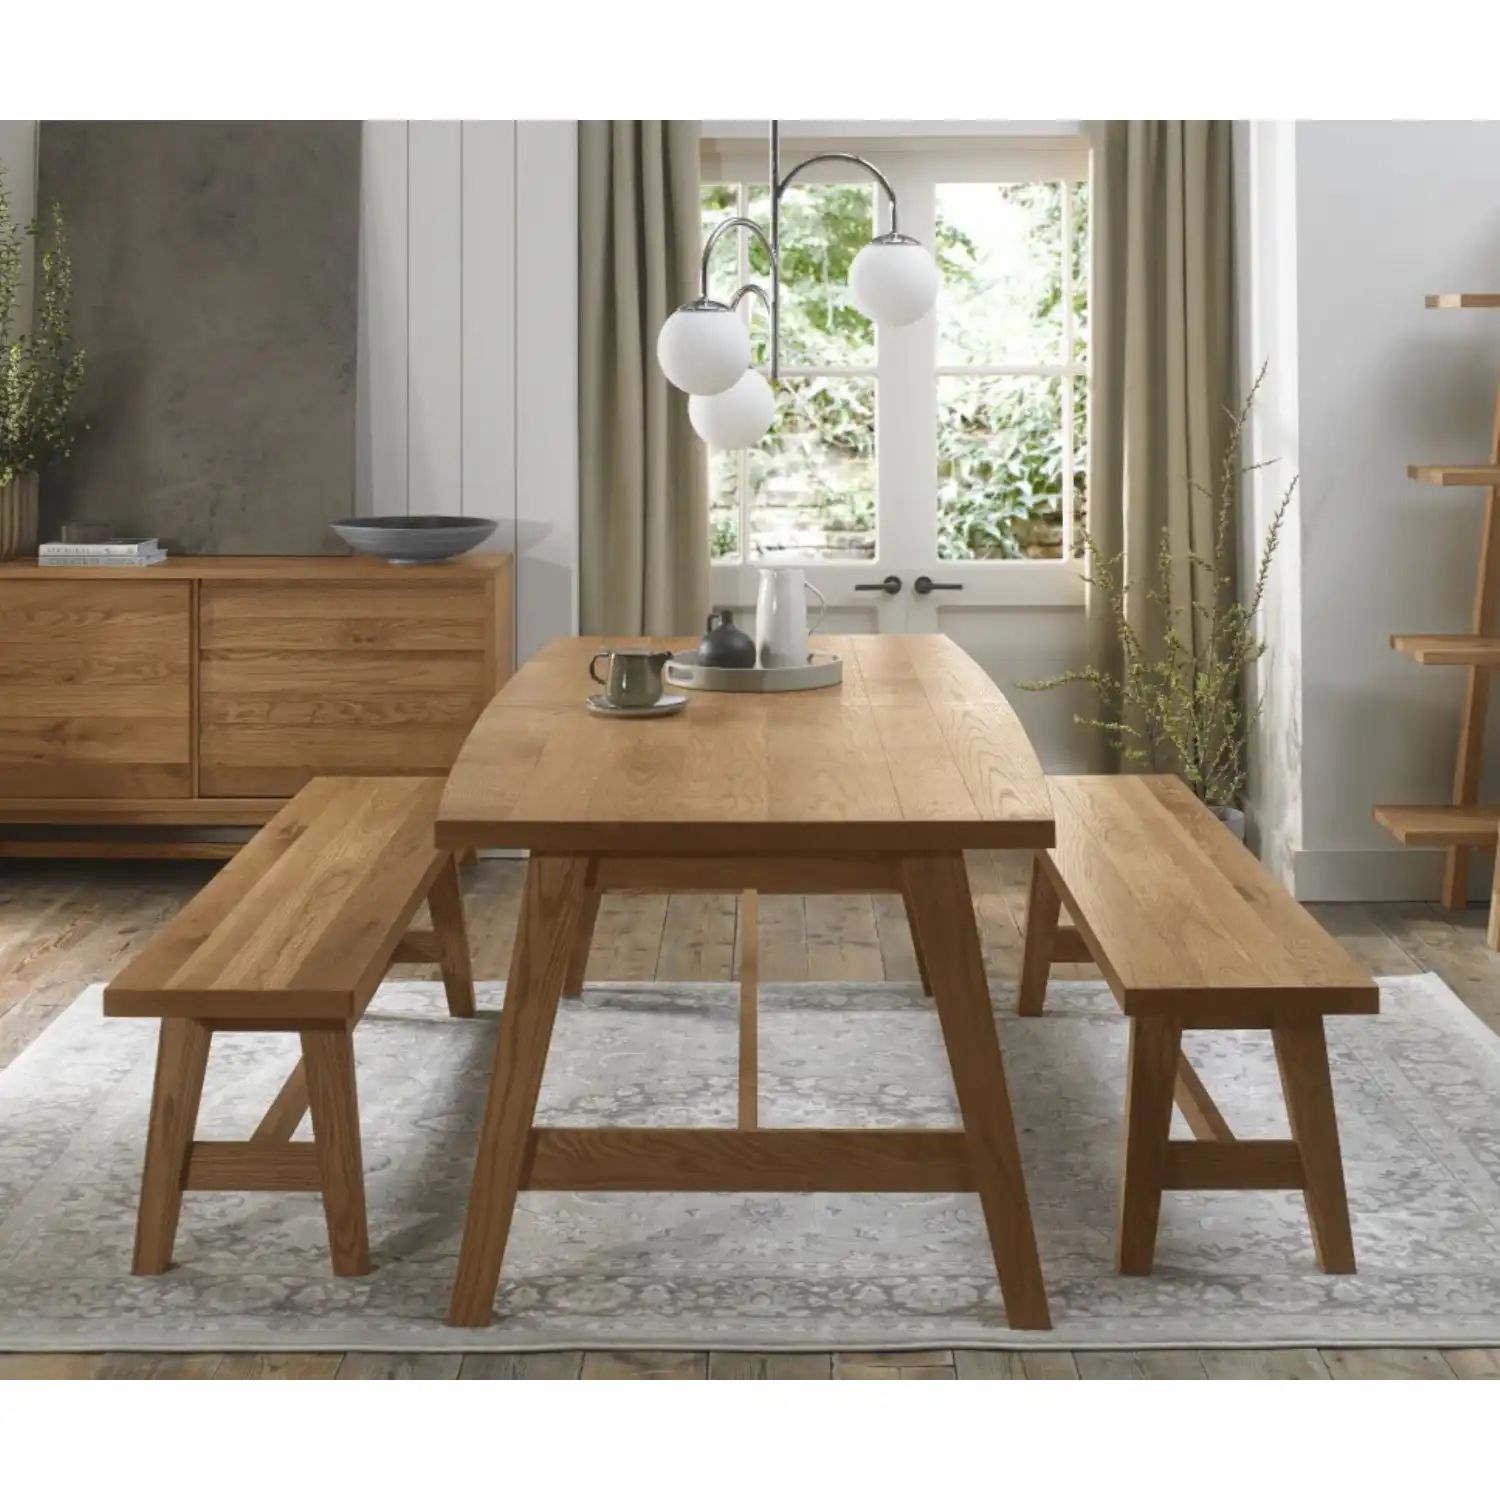 Large Rustic Oak Dining Table Set with 2 Oak Benches